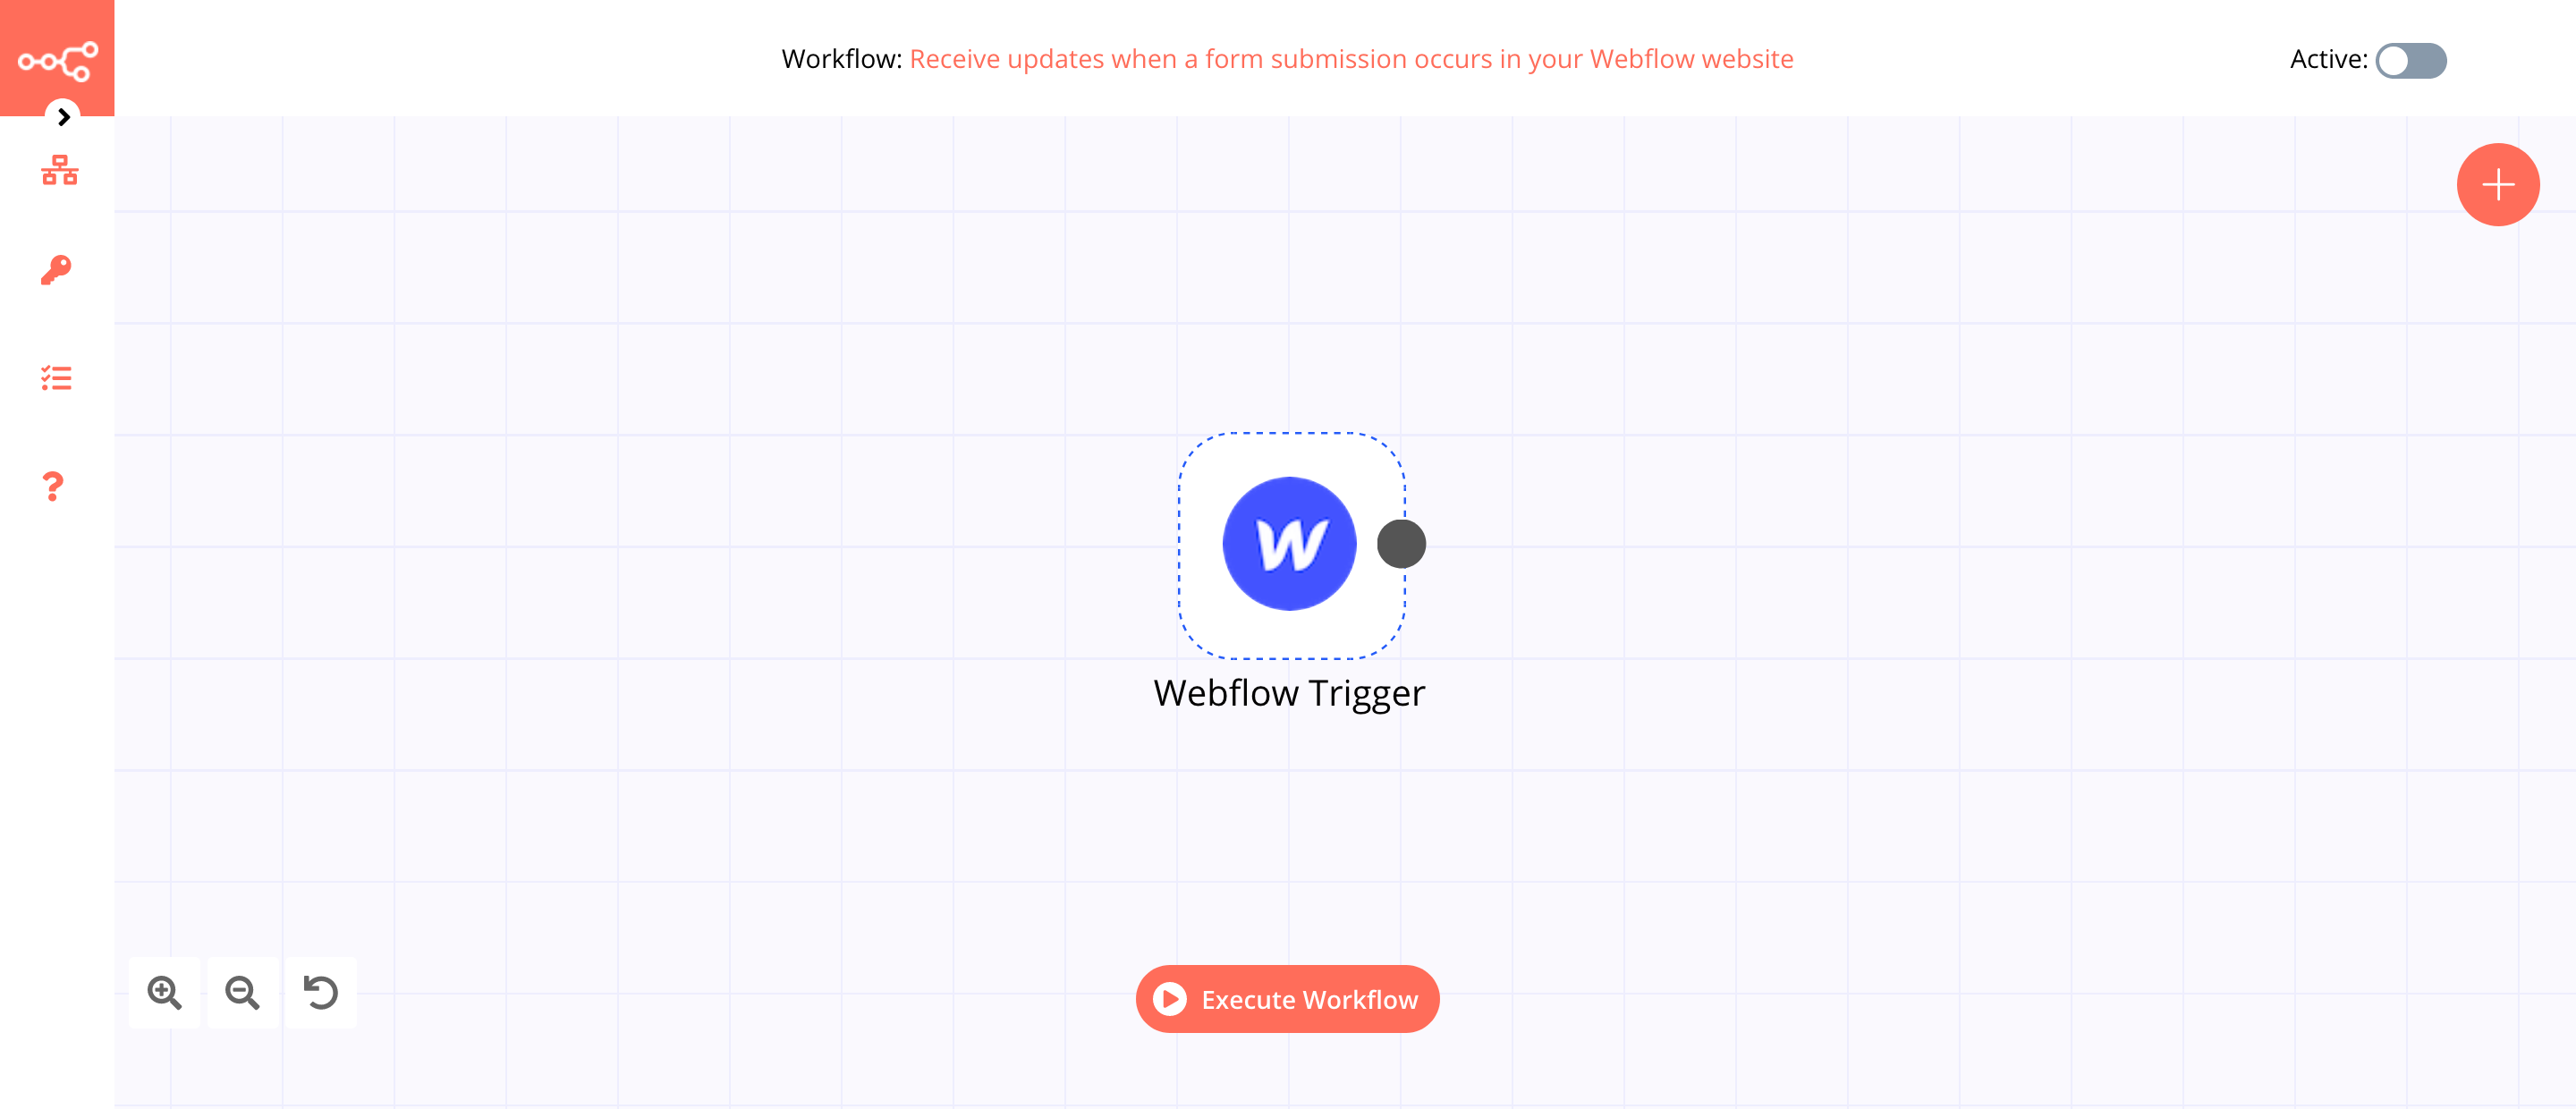 A workflow with the Webflow Trigger node